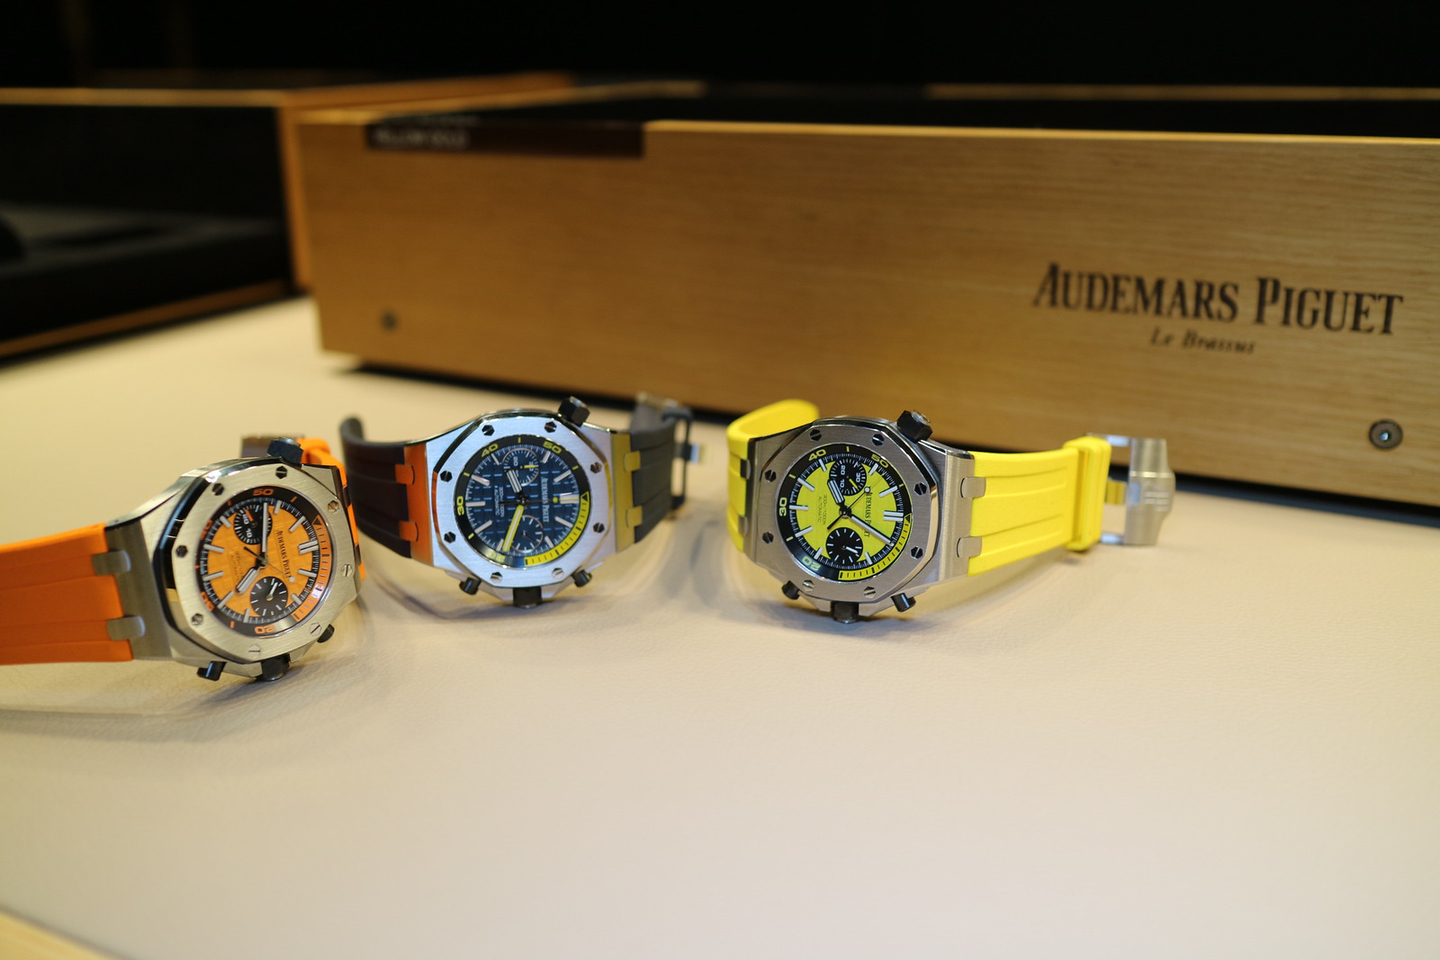 My current watch crush, the multi-colored Audemars Piguet Diver Chrono